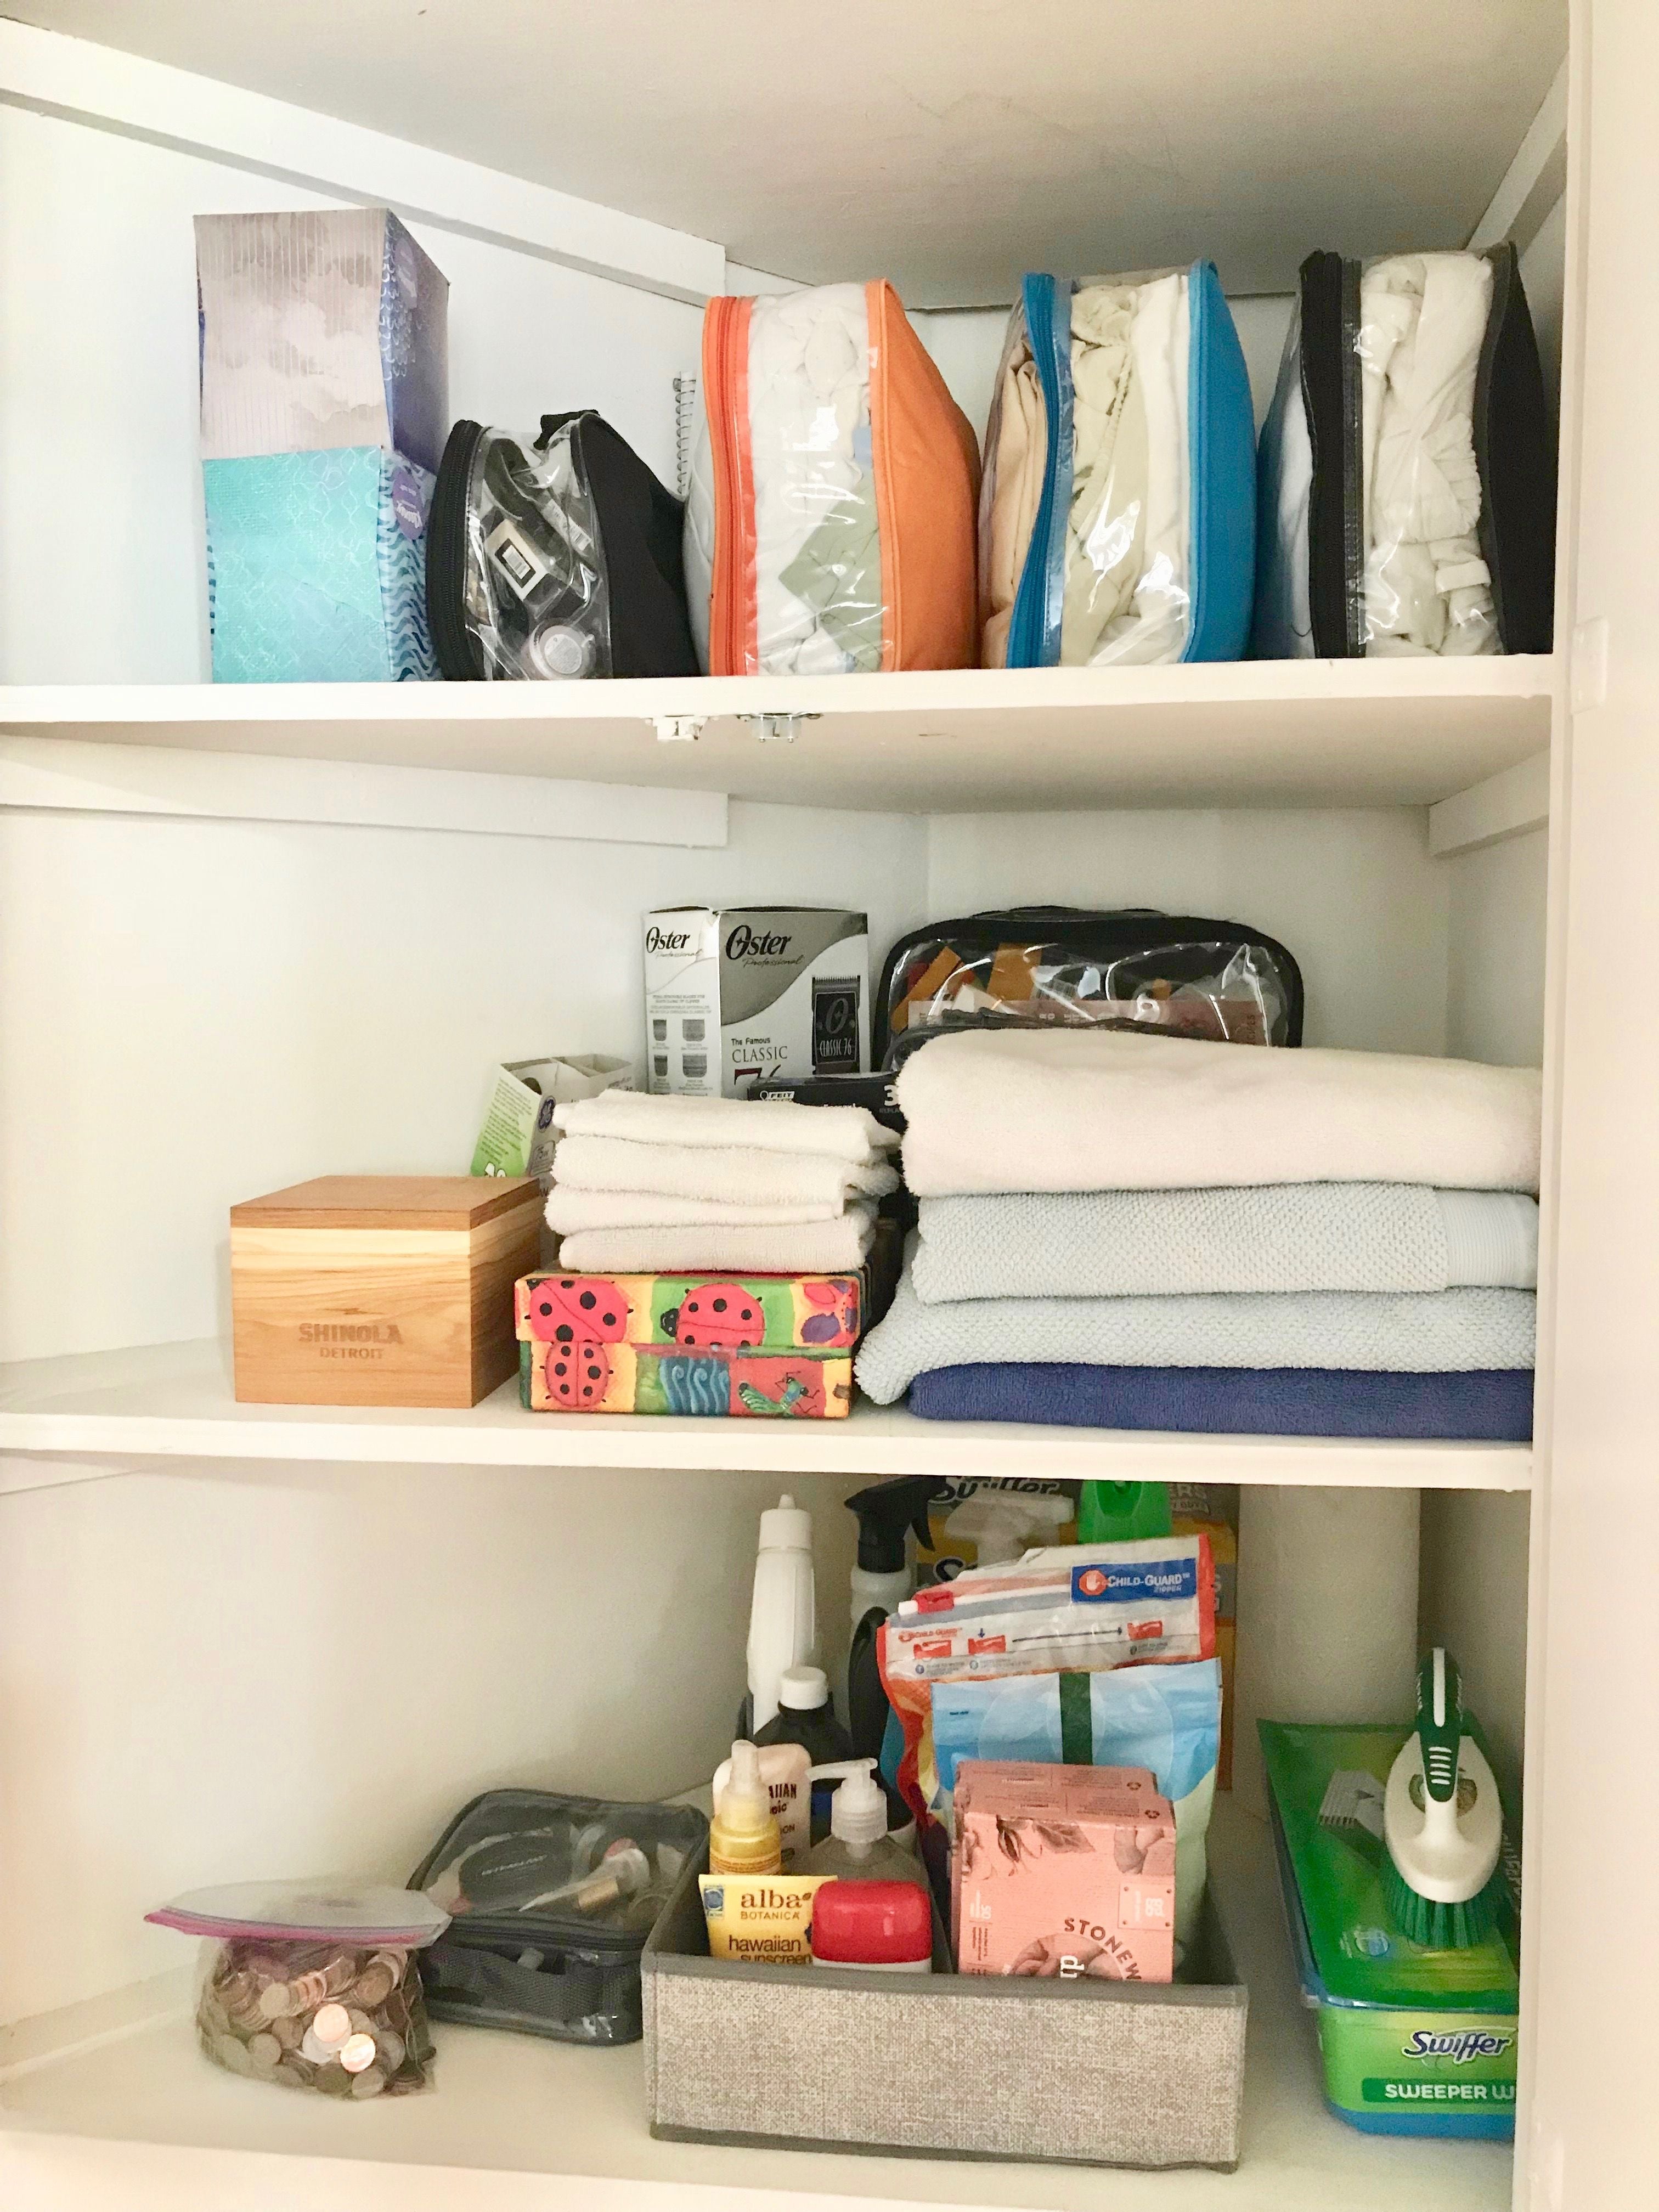 Linen closet organized with packing cubes